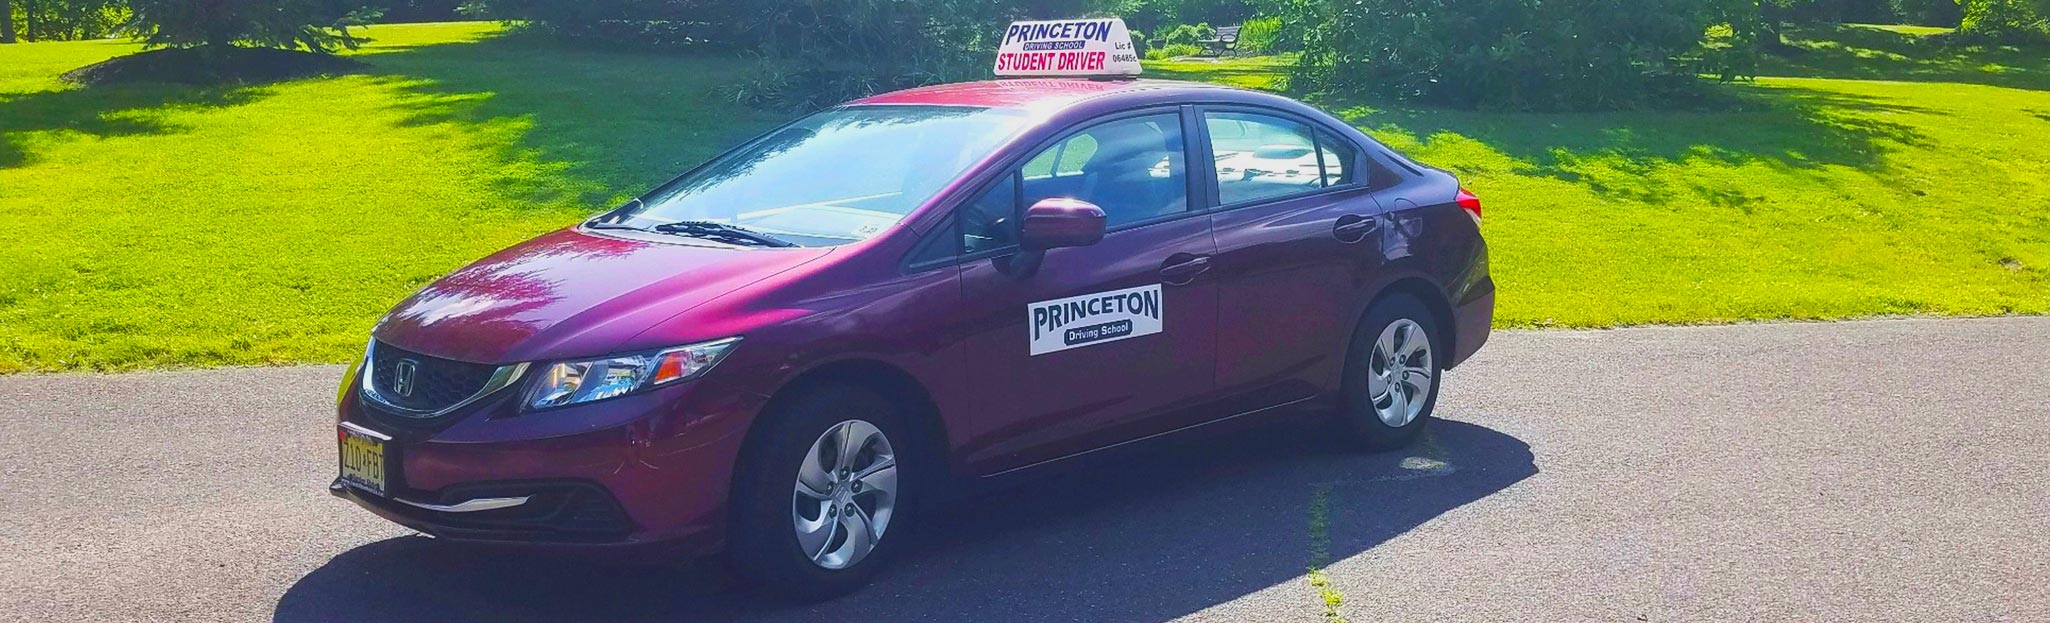 Princeton Driving School About Us